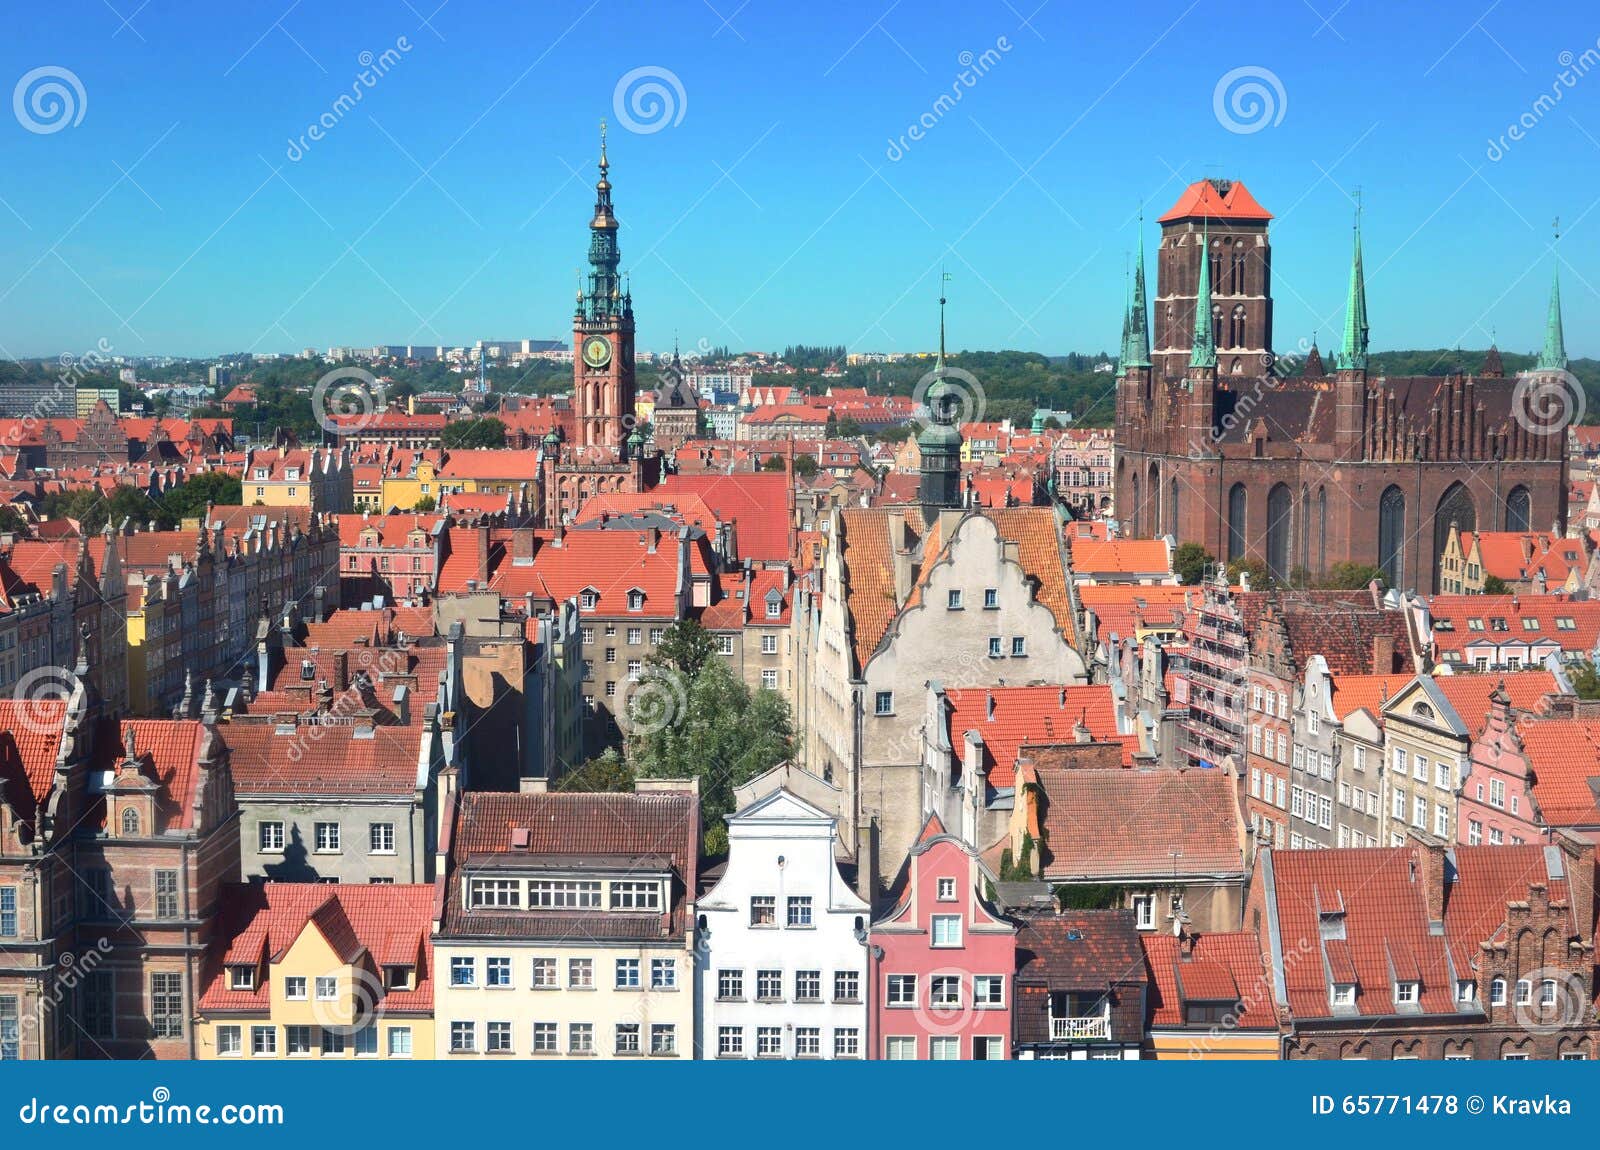 top view on gdansk (danzig) old town in poland